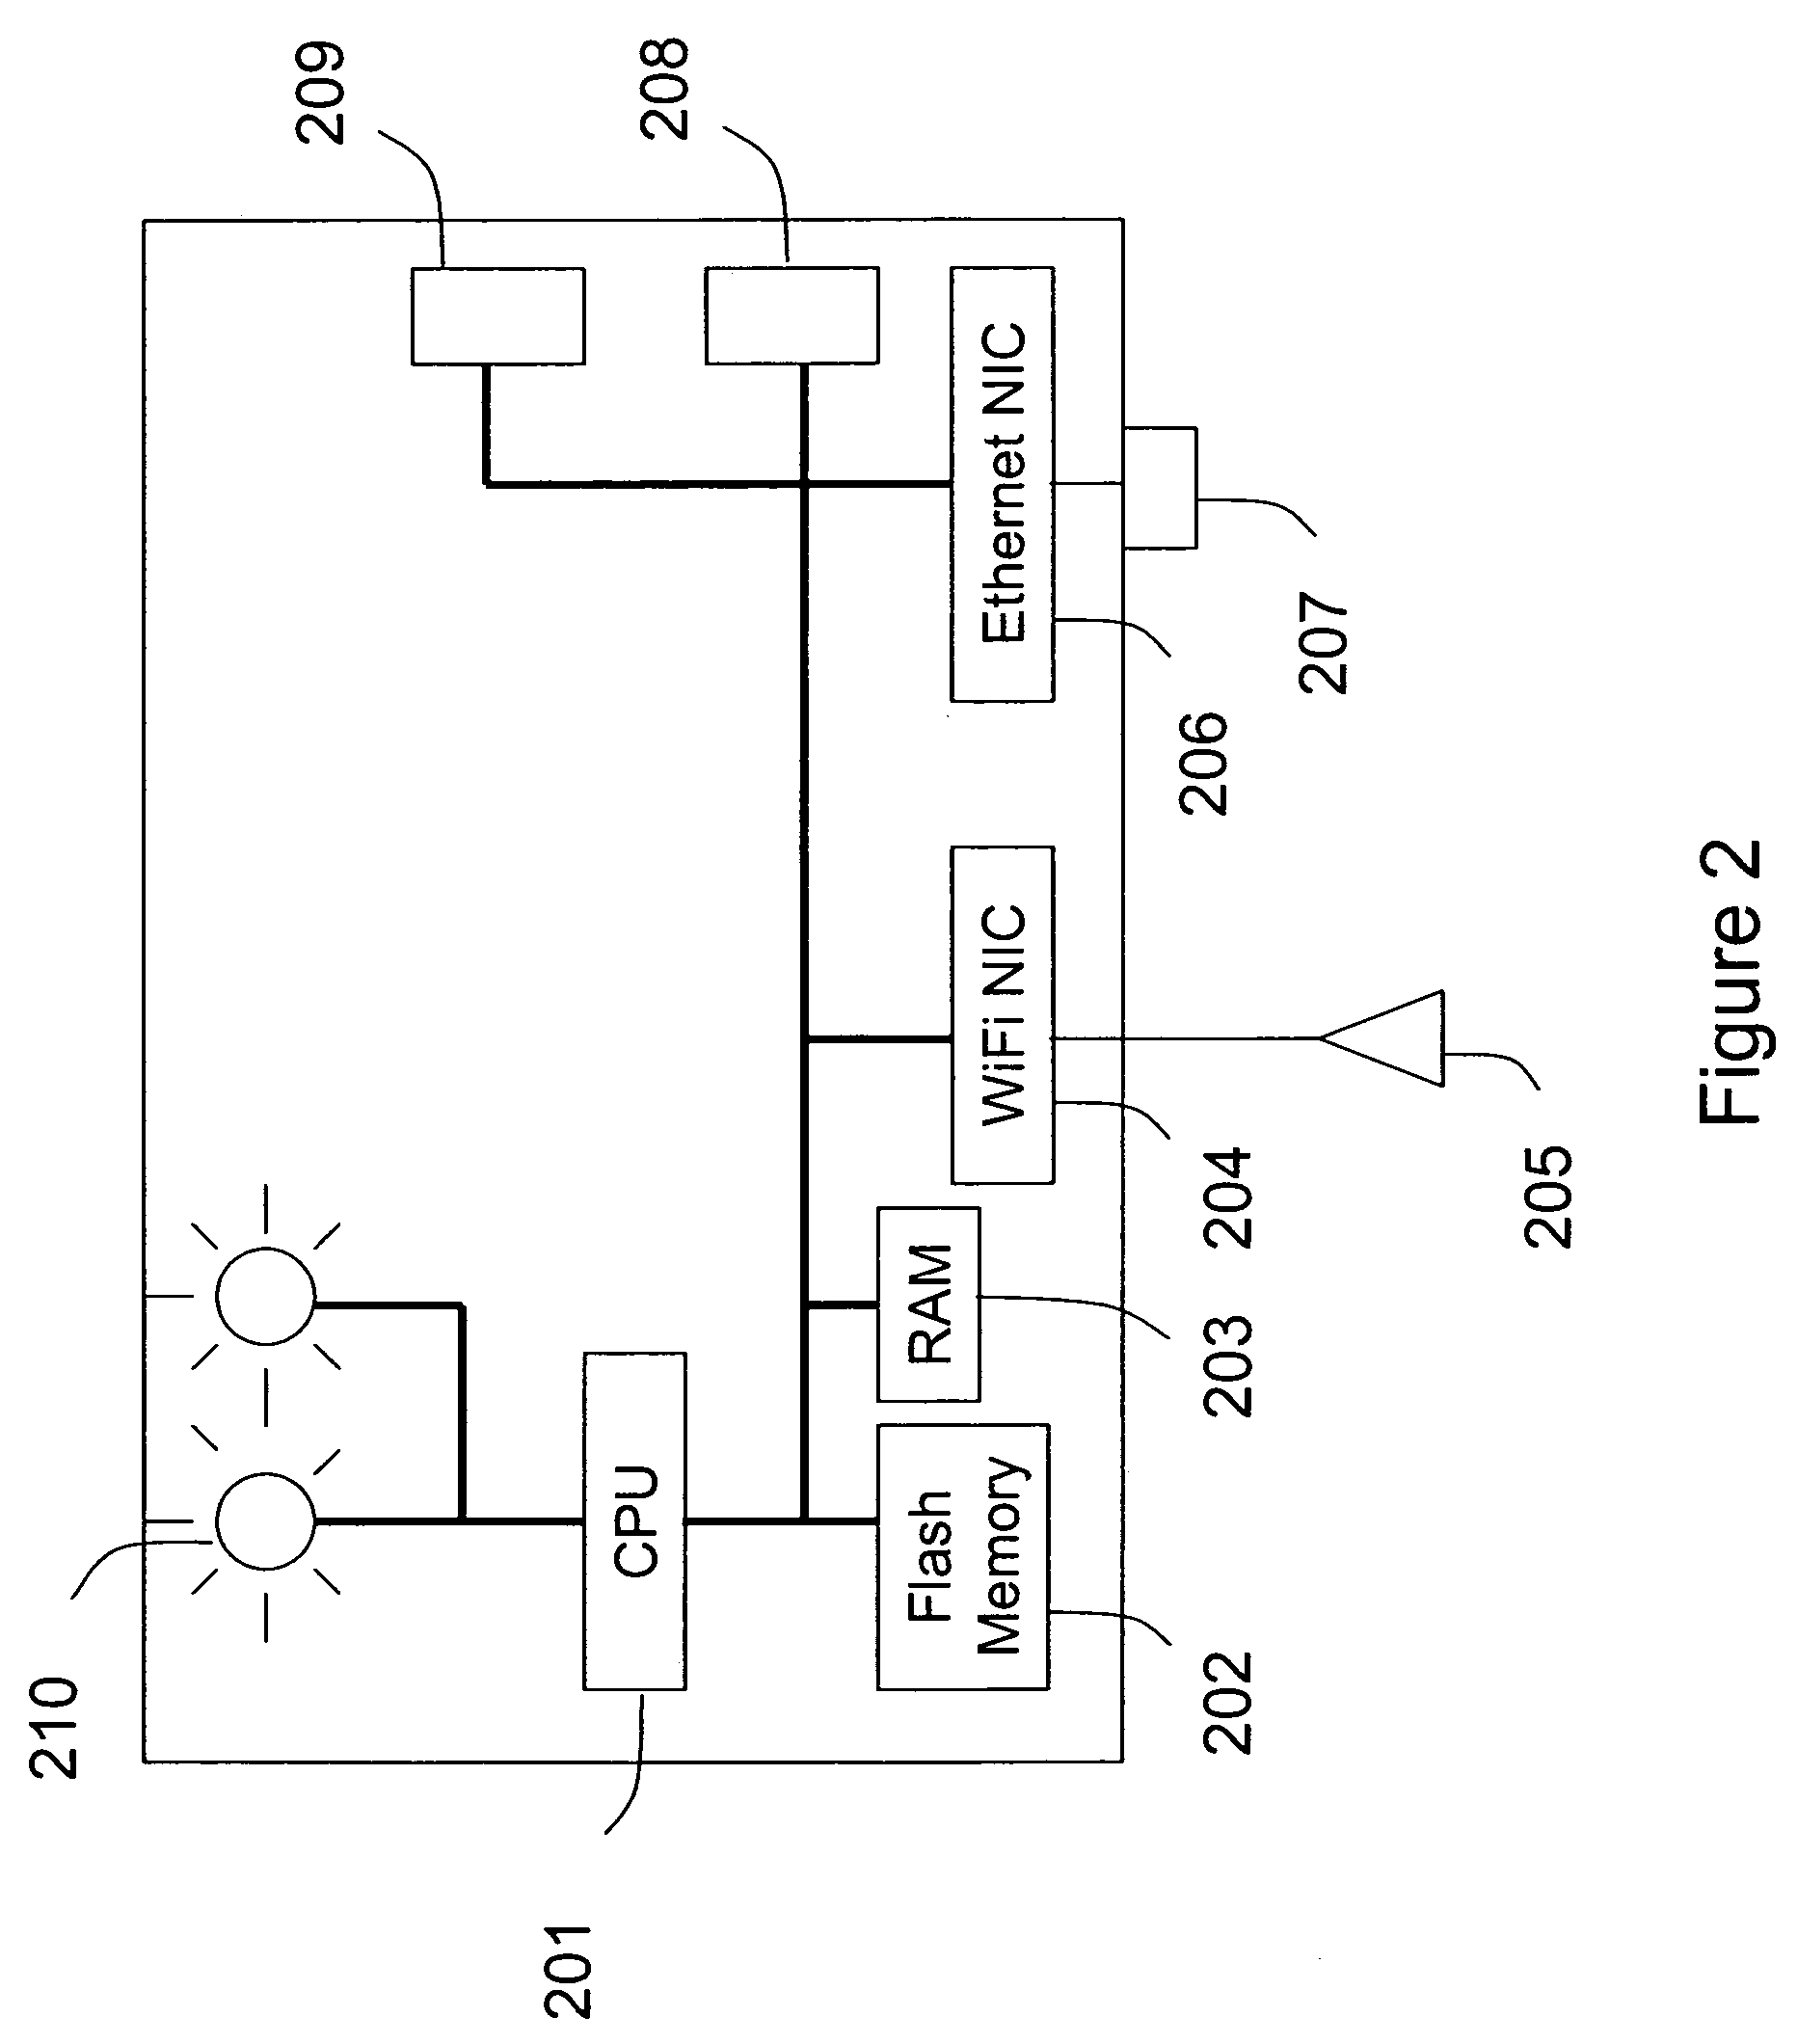 Method and system for detecting wireless access devices operably coupled to computer local area networks and related methods